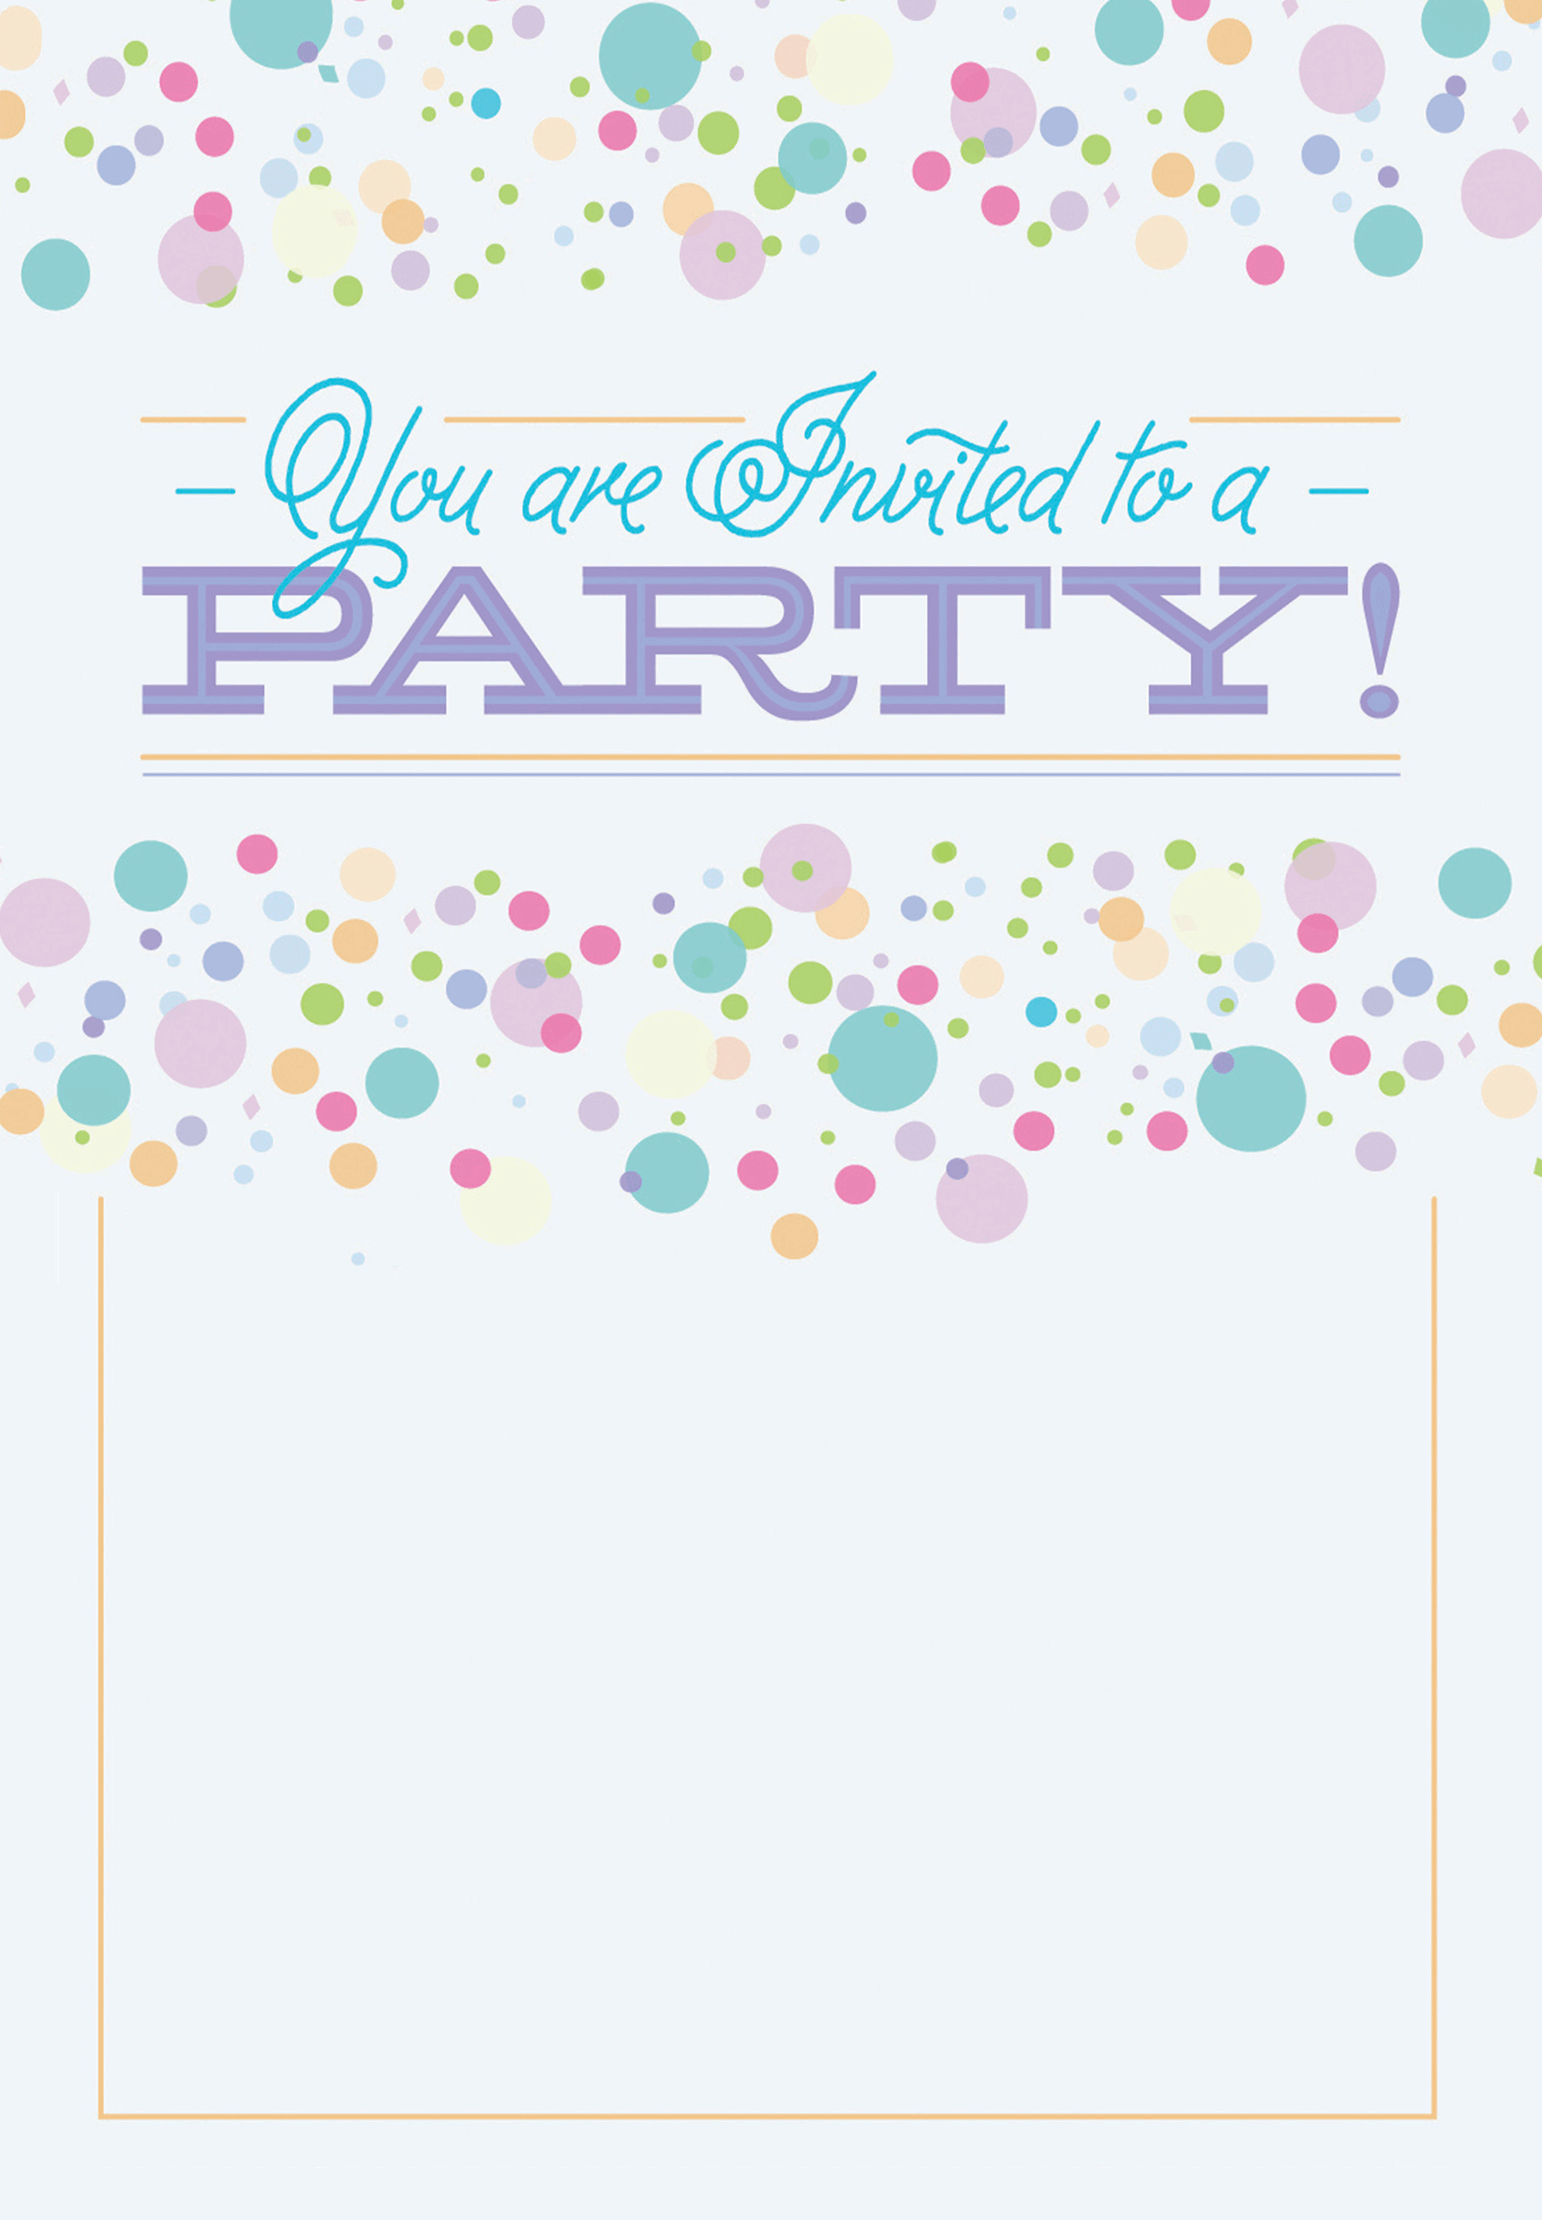 Polka Dots Free Printable Party Invitation Template Greetings within measurements 1542 X 2220